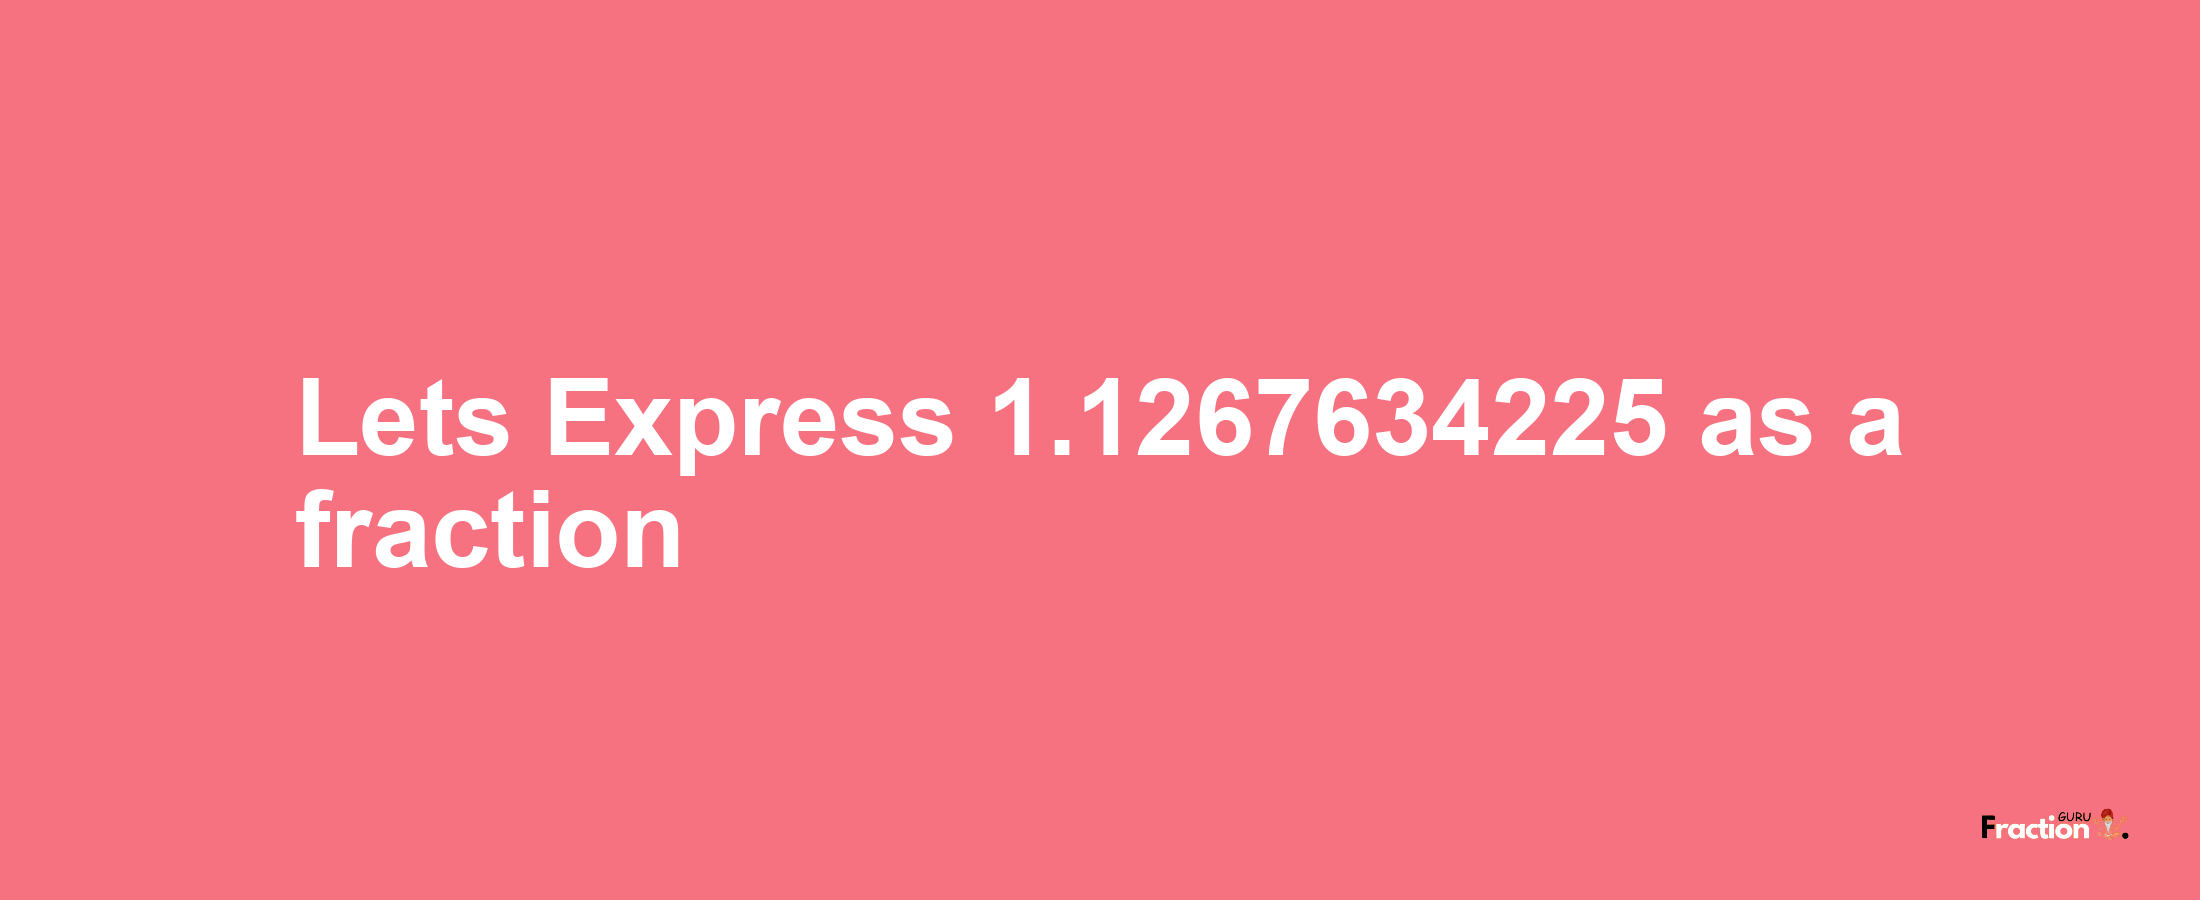 Lets Express 1.1267634225 as afraction